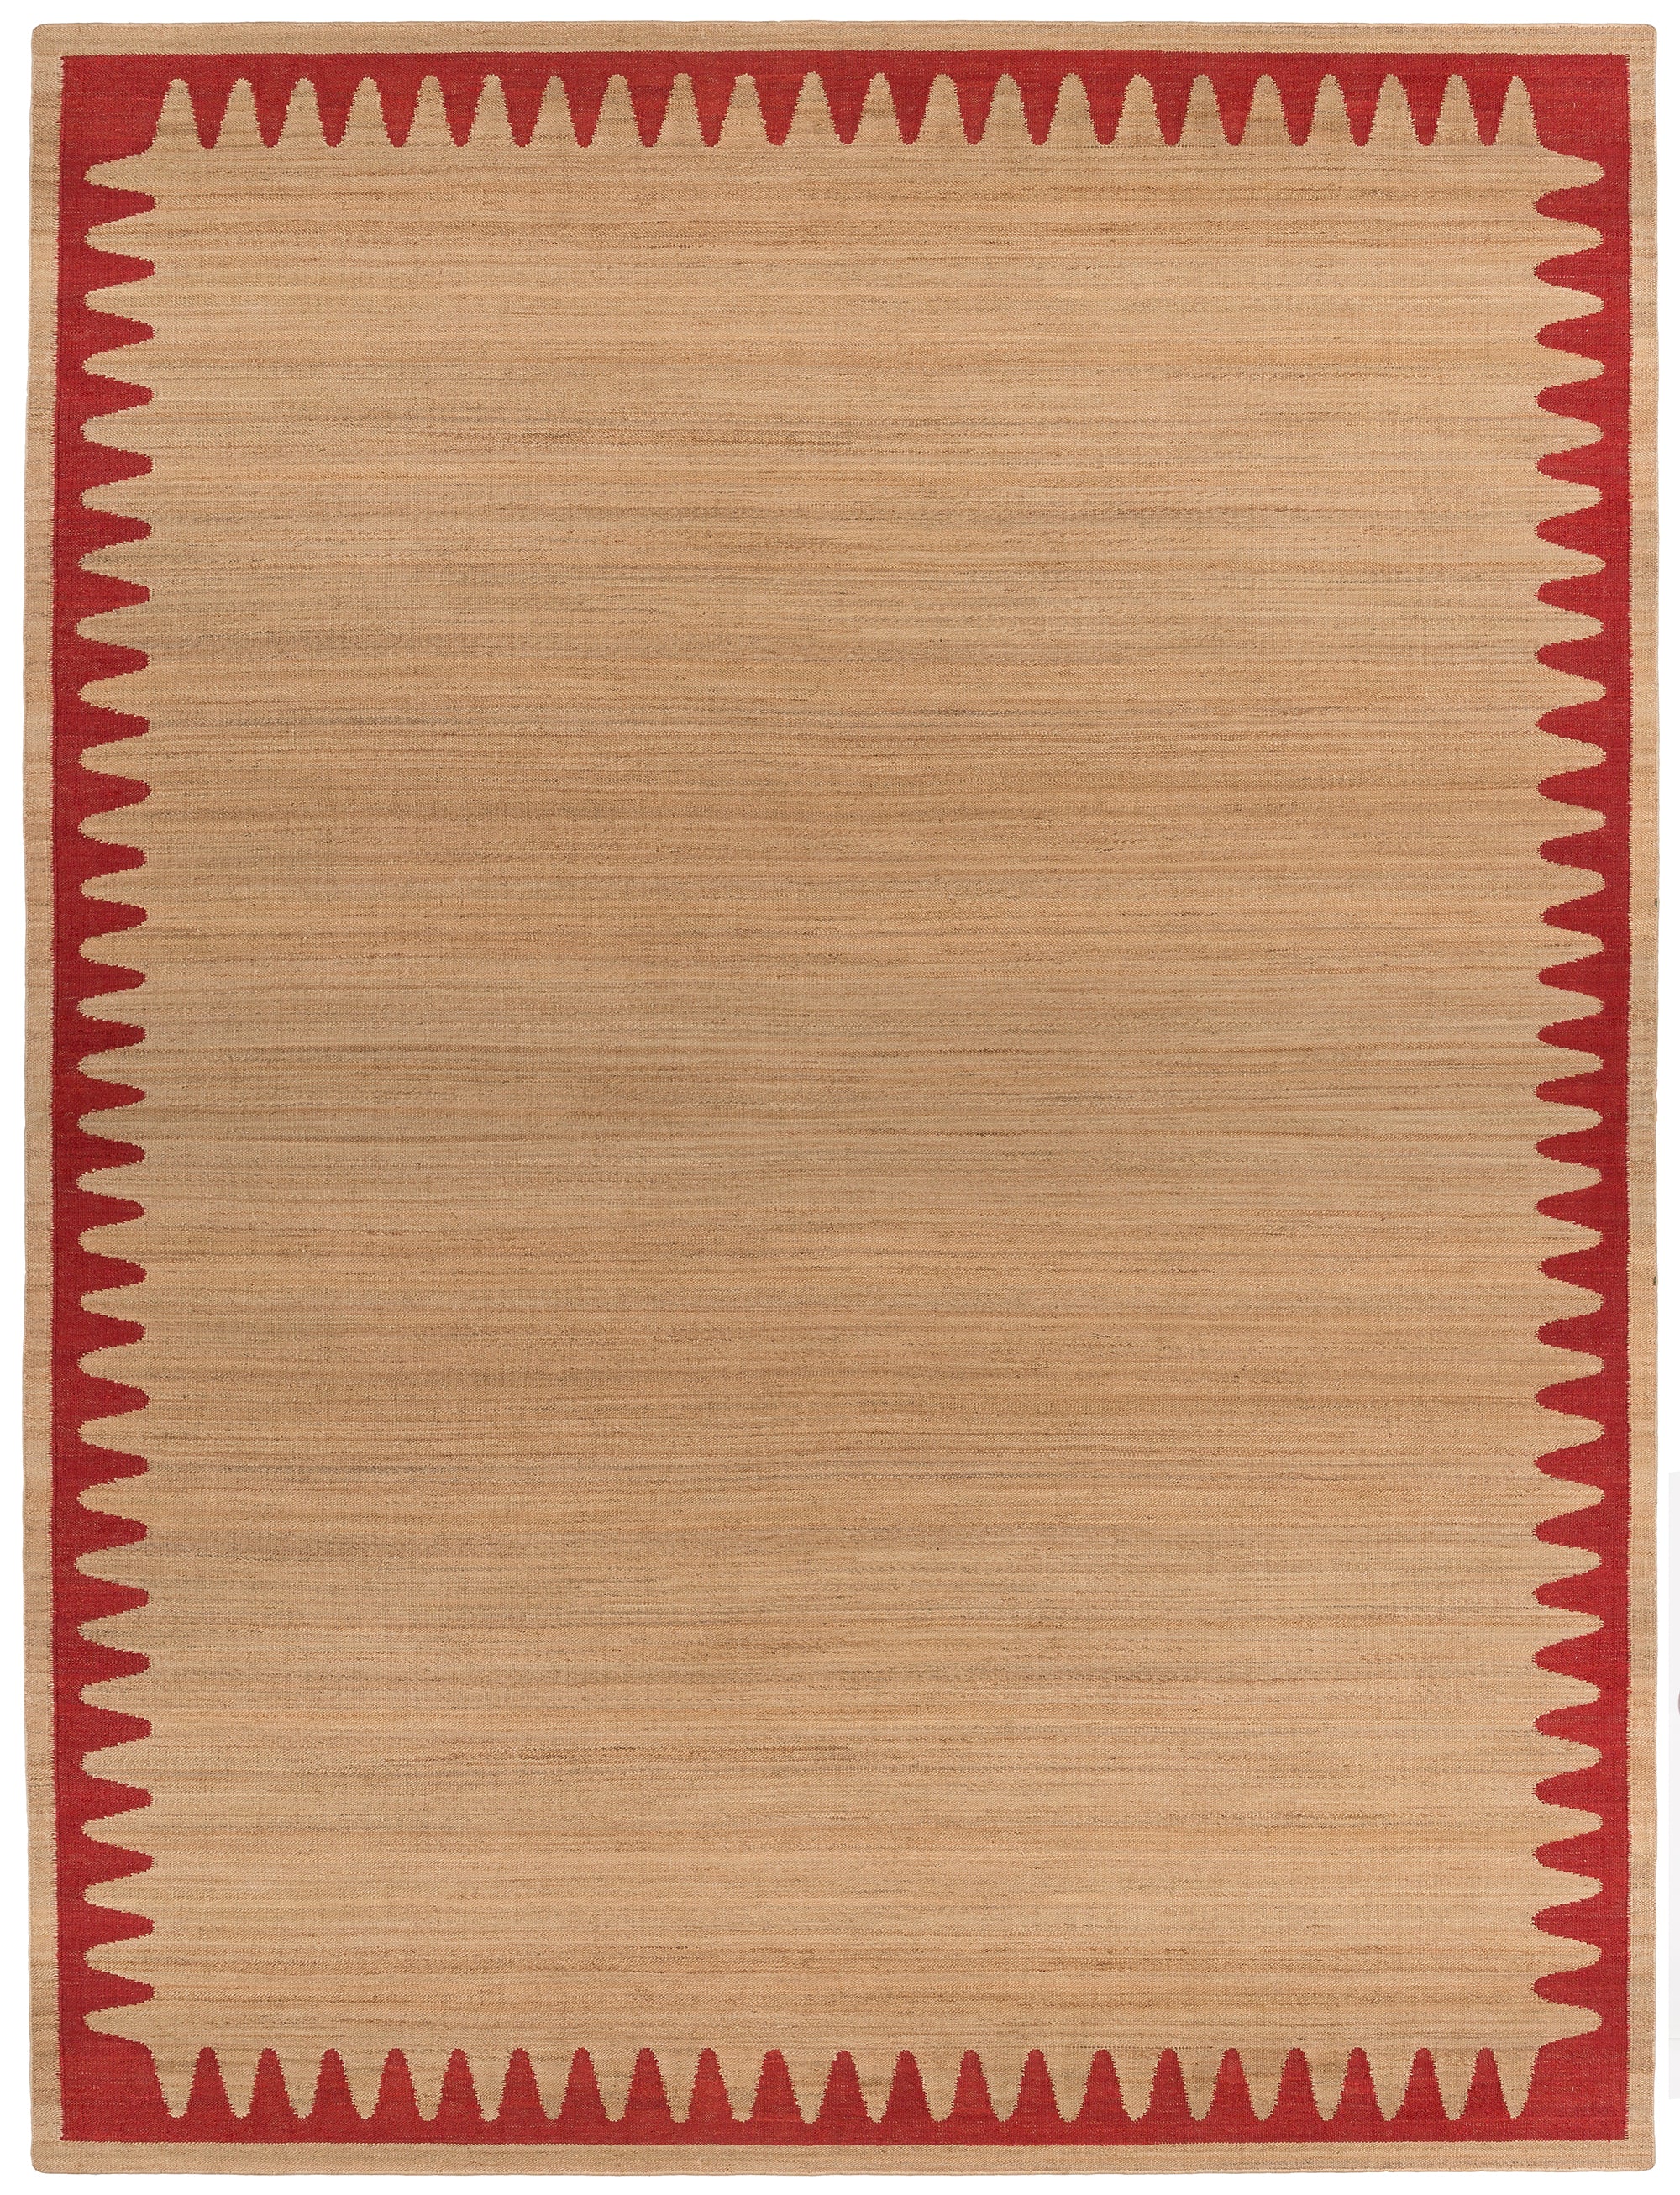 Waver Rug in Safflower Red, a strated ecru field with a red flame stitch border. 